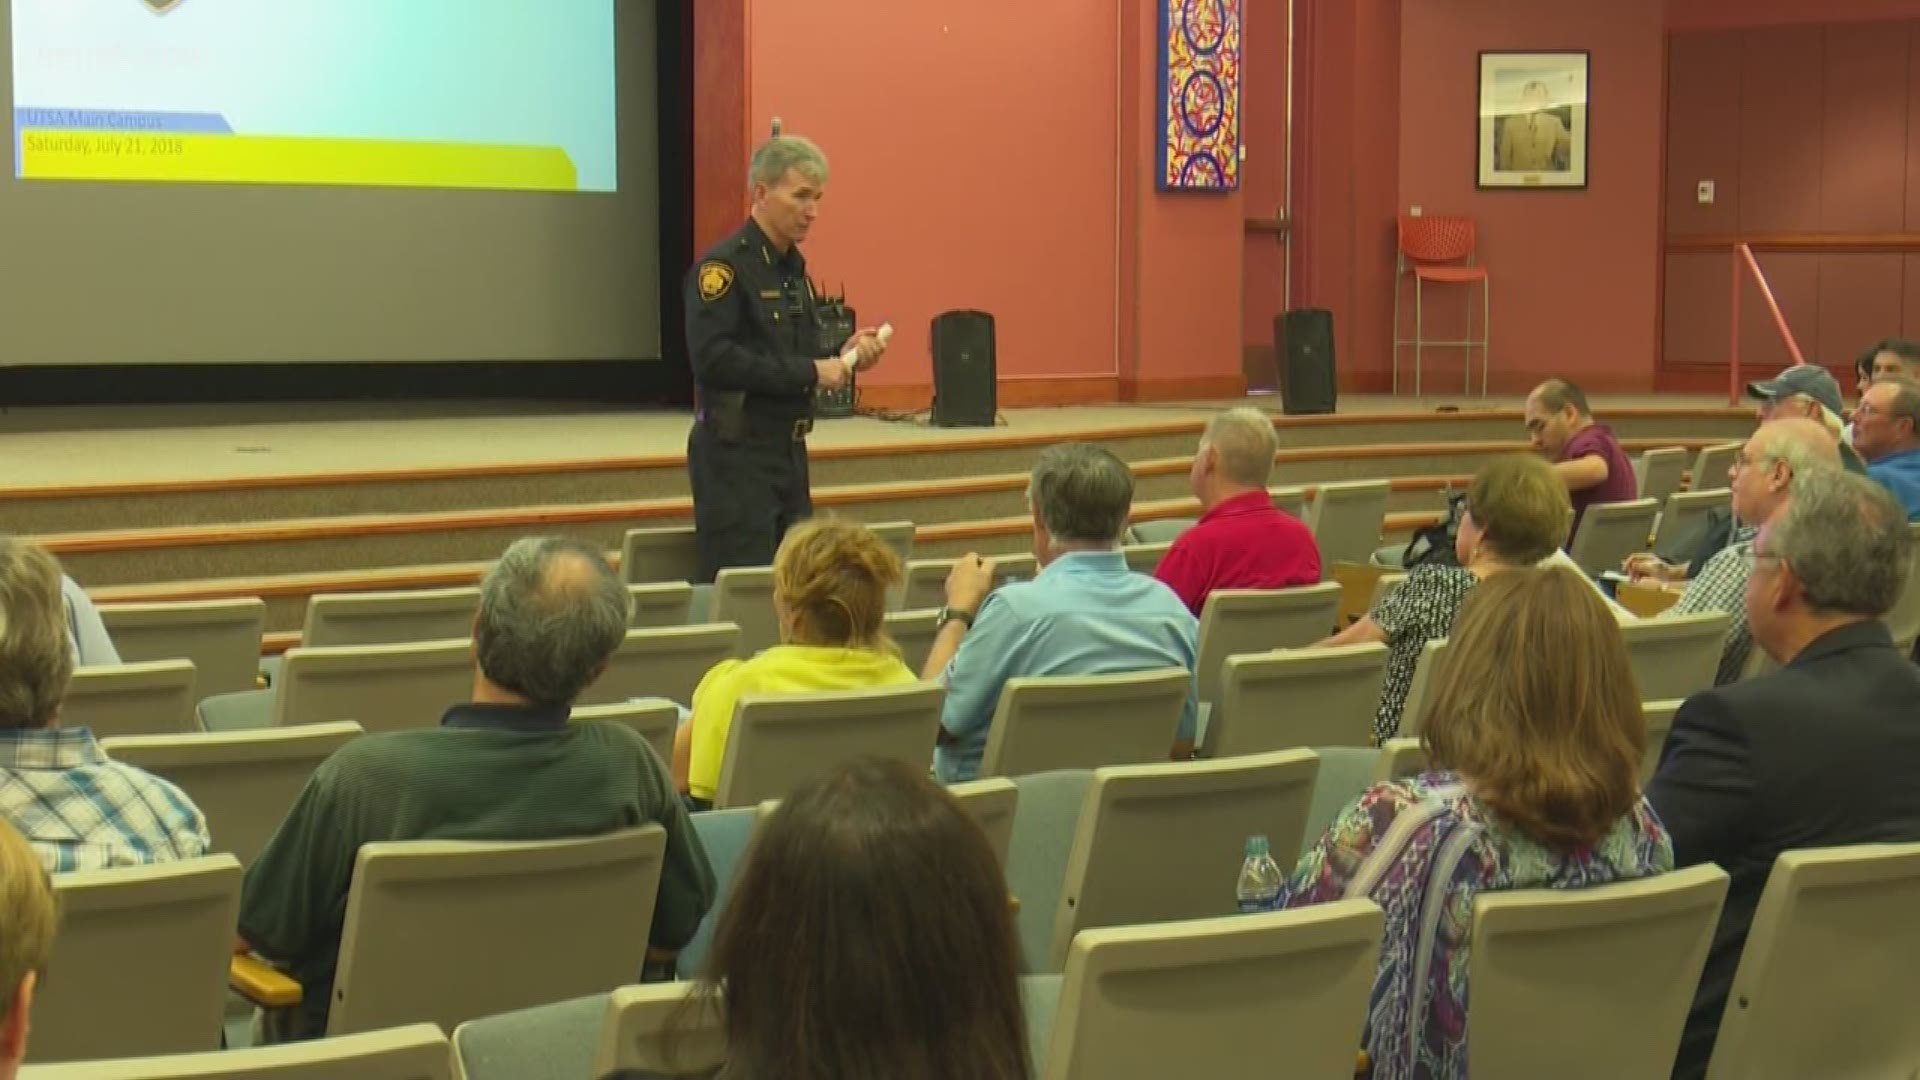 San Antonians looking to cut down crime showed up at a town hall this morning to give Police Chief William McManus an earful. Eyewitness News reporter Sue Calberg has more.